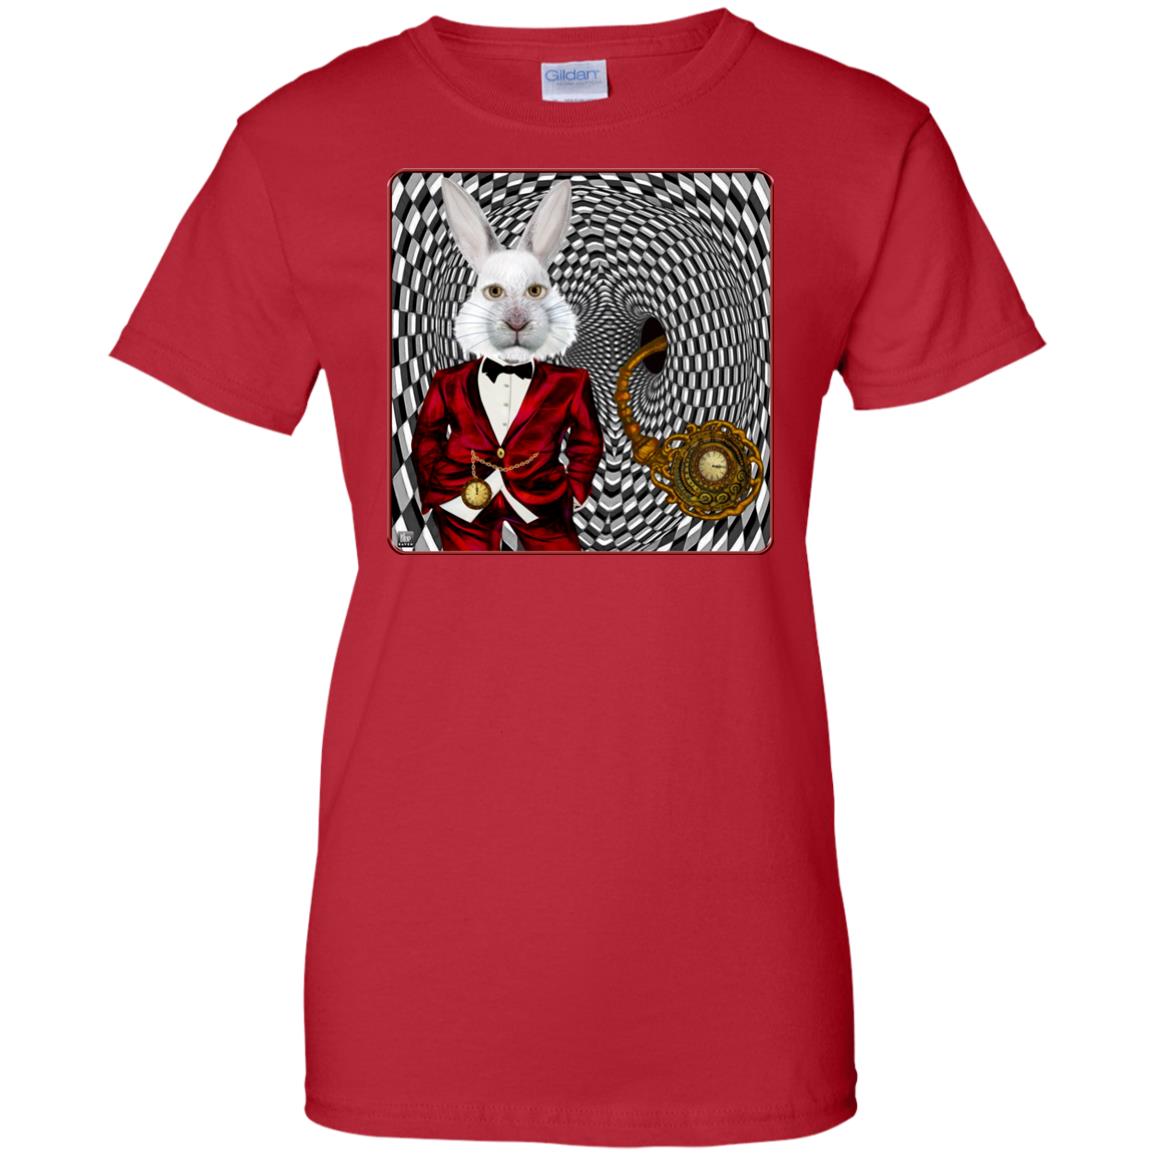 portrait of the white rabbit - Women's Relaxed Fit T-Shirt